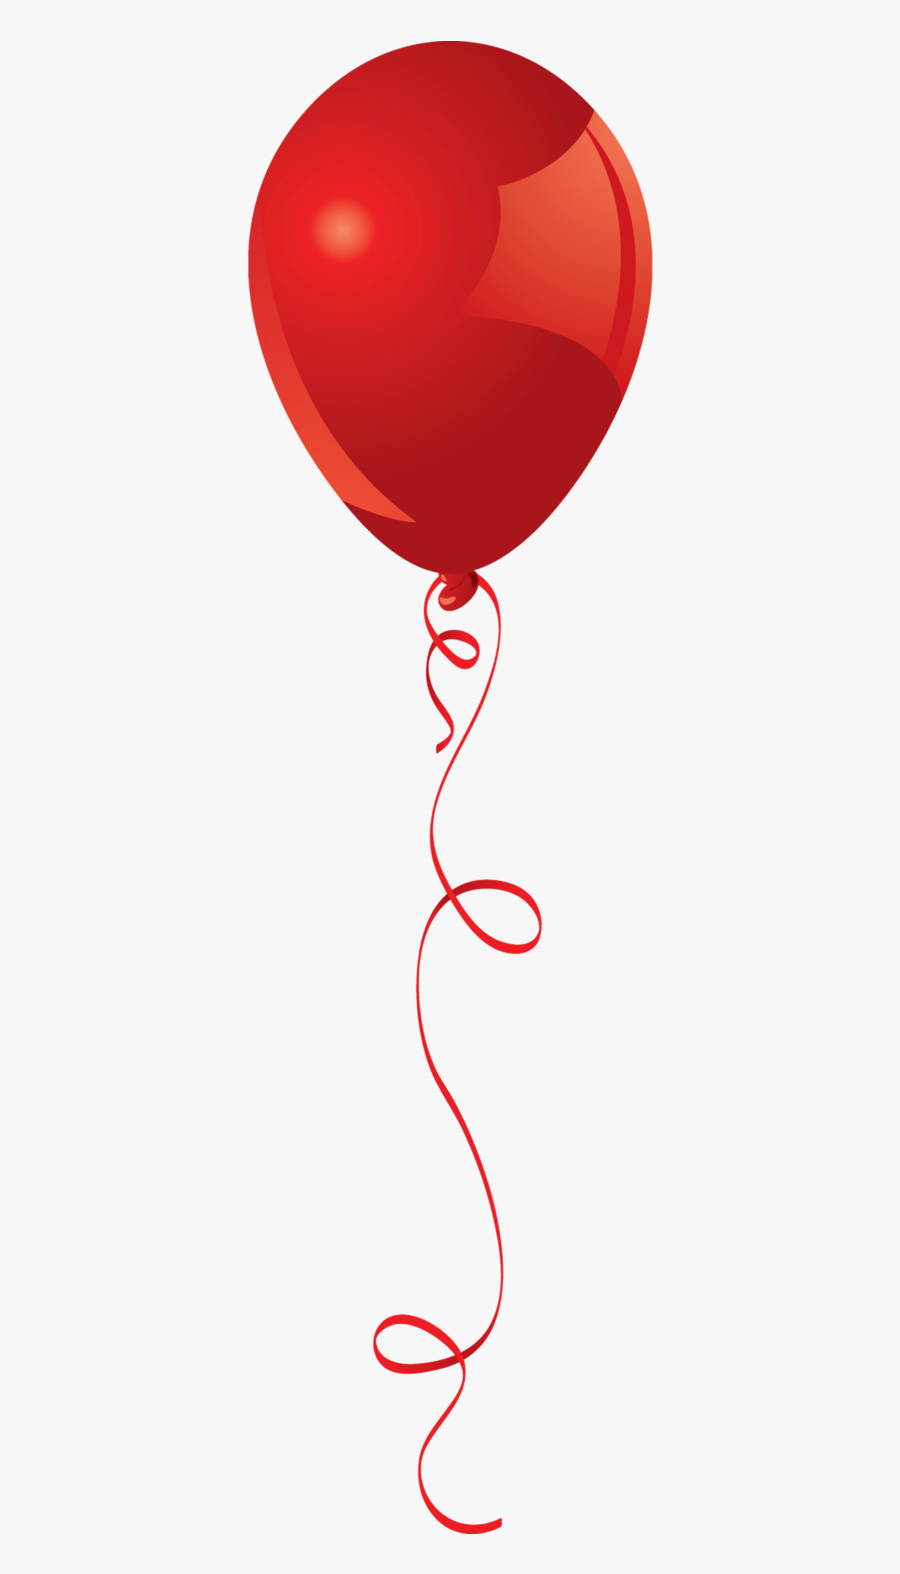 Balloon - Real Red Balloon Transparent, Transparent Clipart